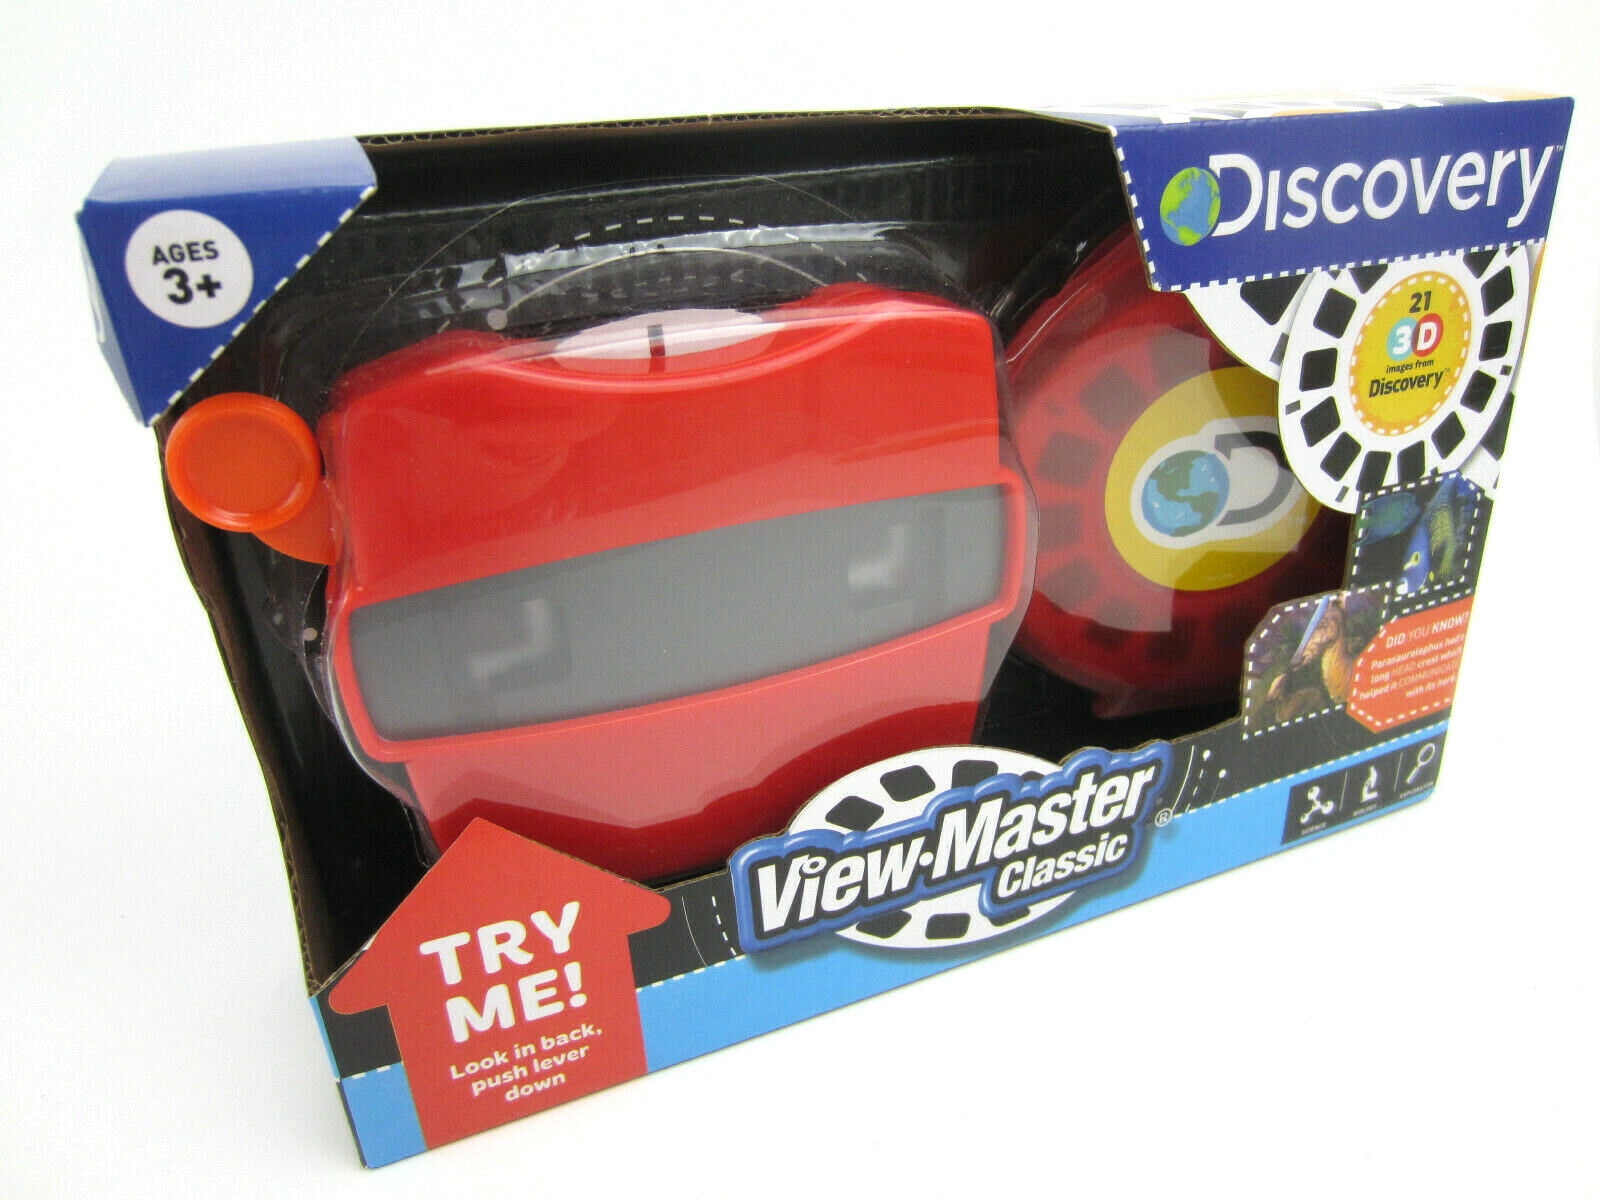 Big Game Toys 3D View Master Discovery Kids Dinosaurs Marine